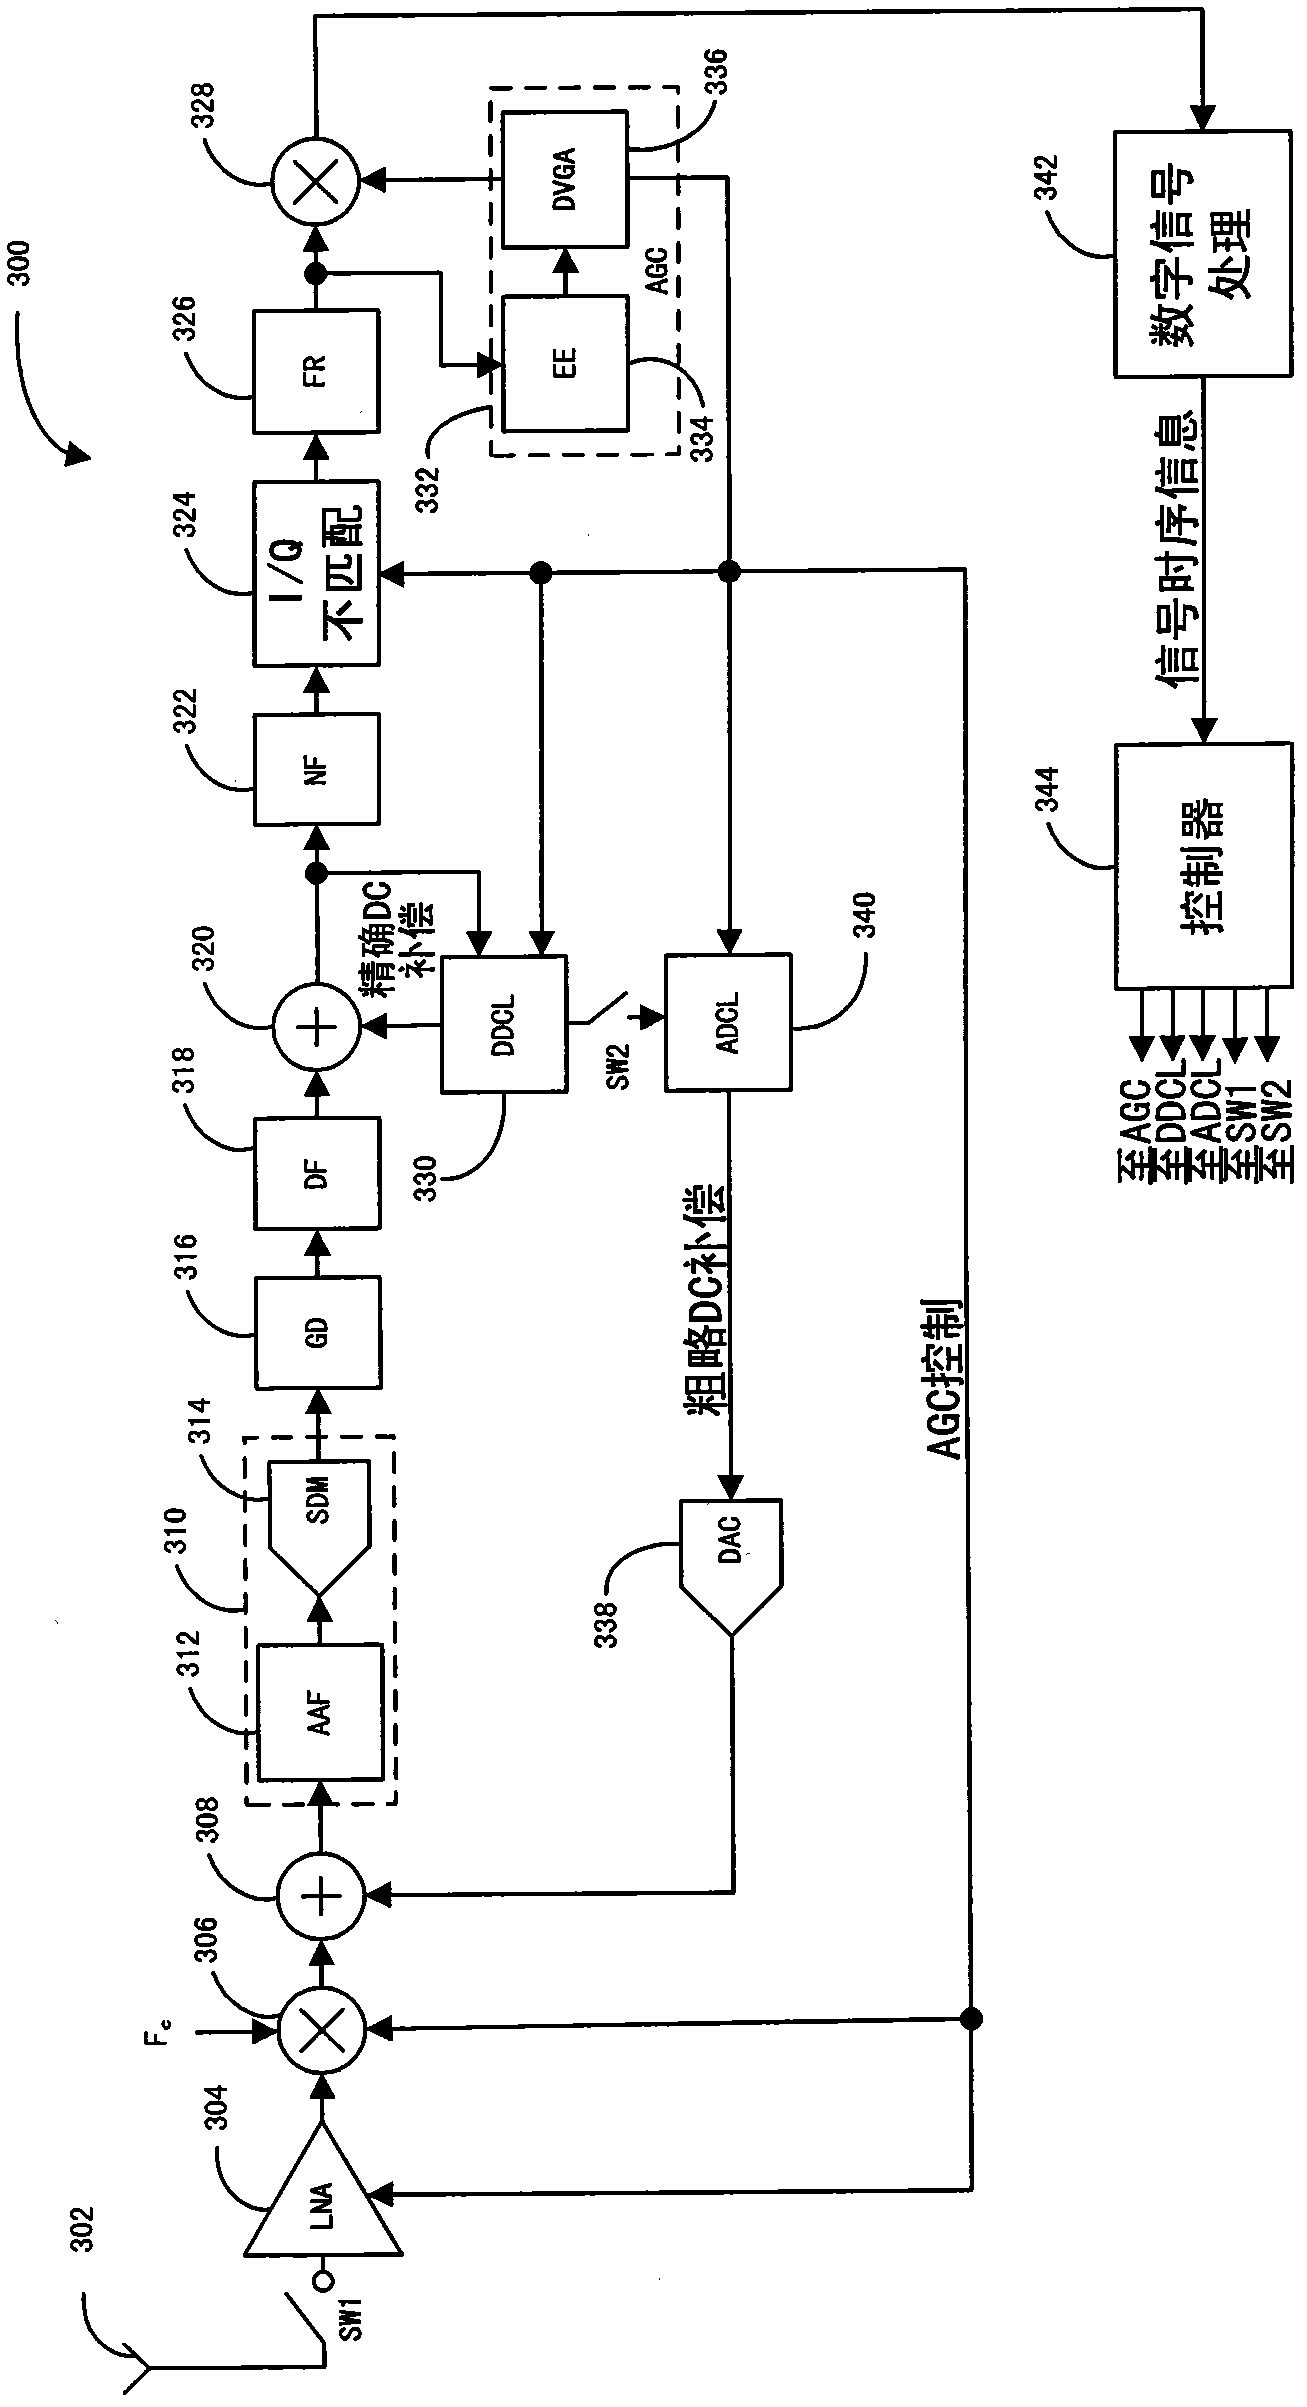 Method and system for DC compensation and AGC